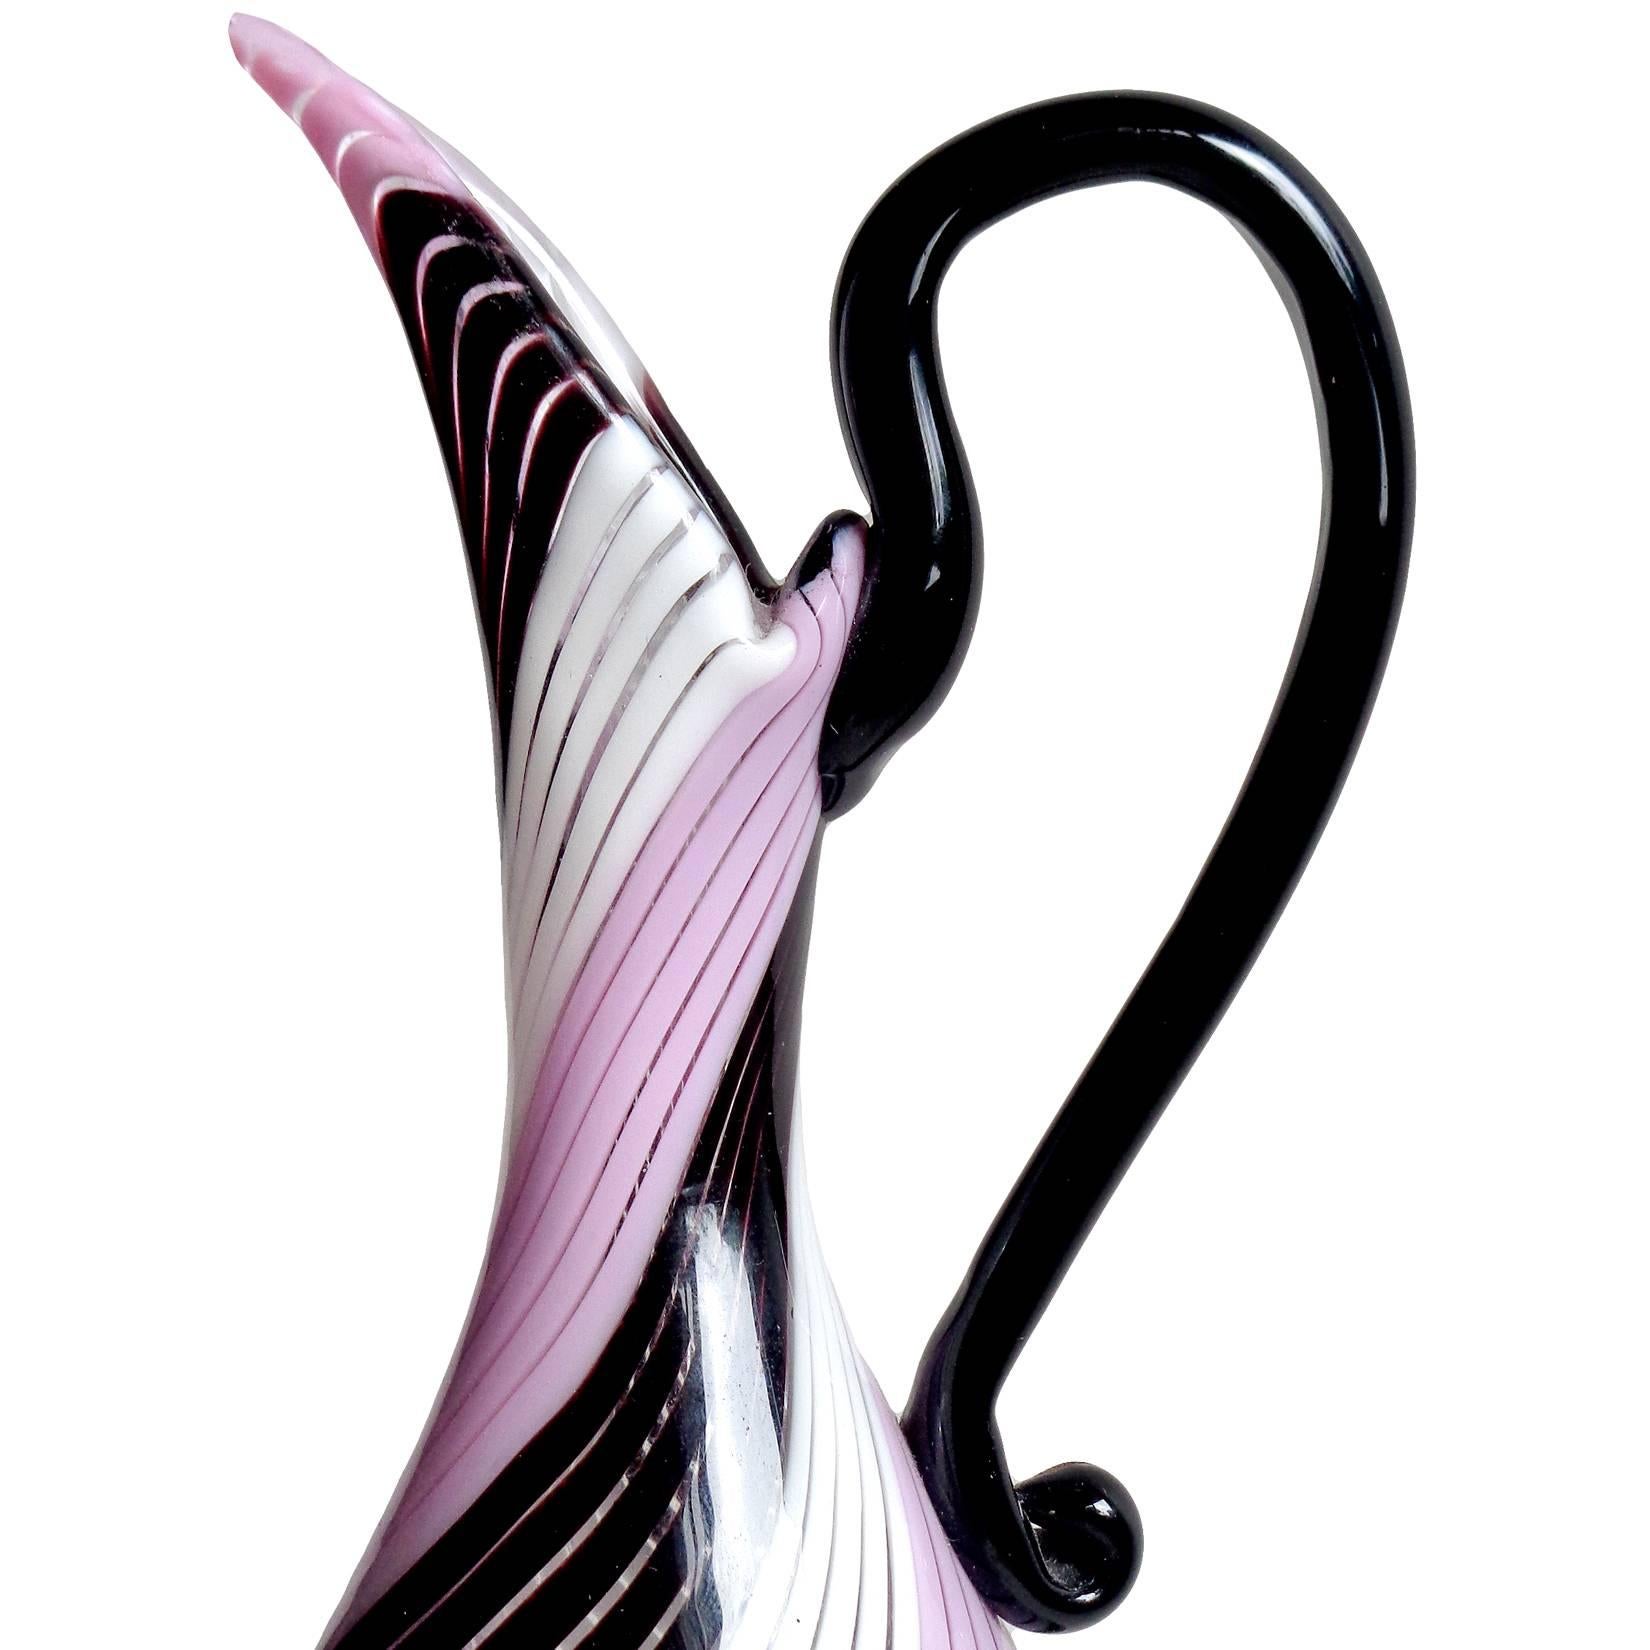 Beautiful vintage Murano hand blown black, white and pink Italian art glass pitcher / vase. Documented to designer Dino Martens for Aureliano Toso. Striking alternating color combination, creating a unique pattern The elegant applied handle and foot